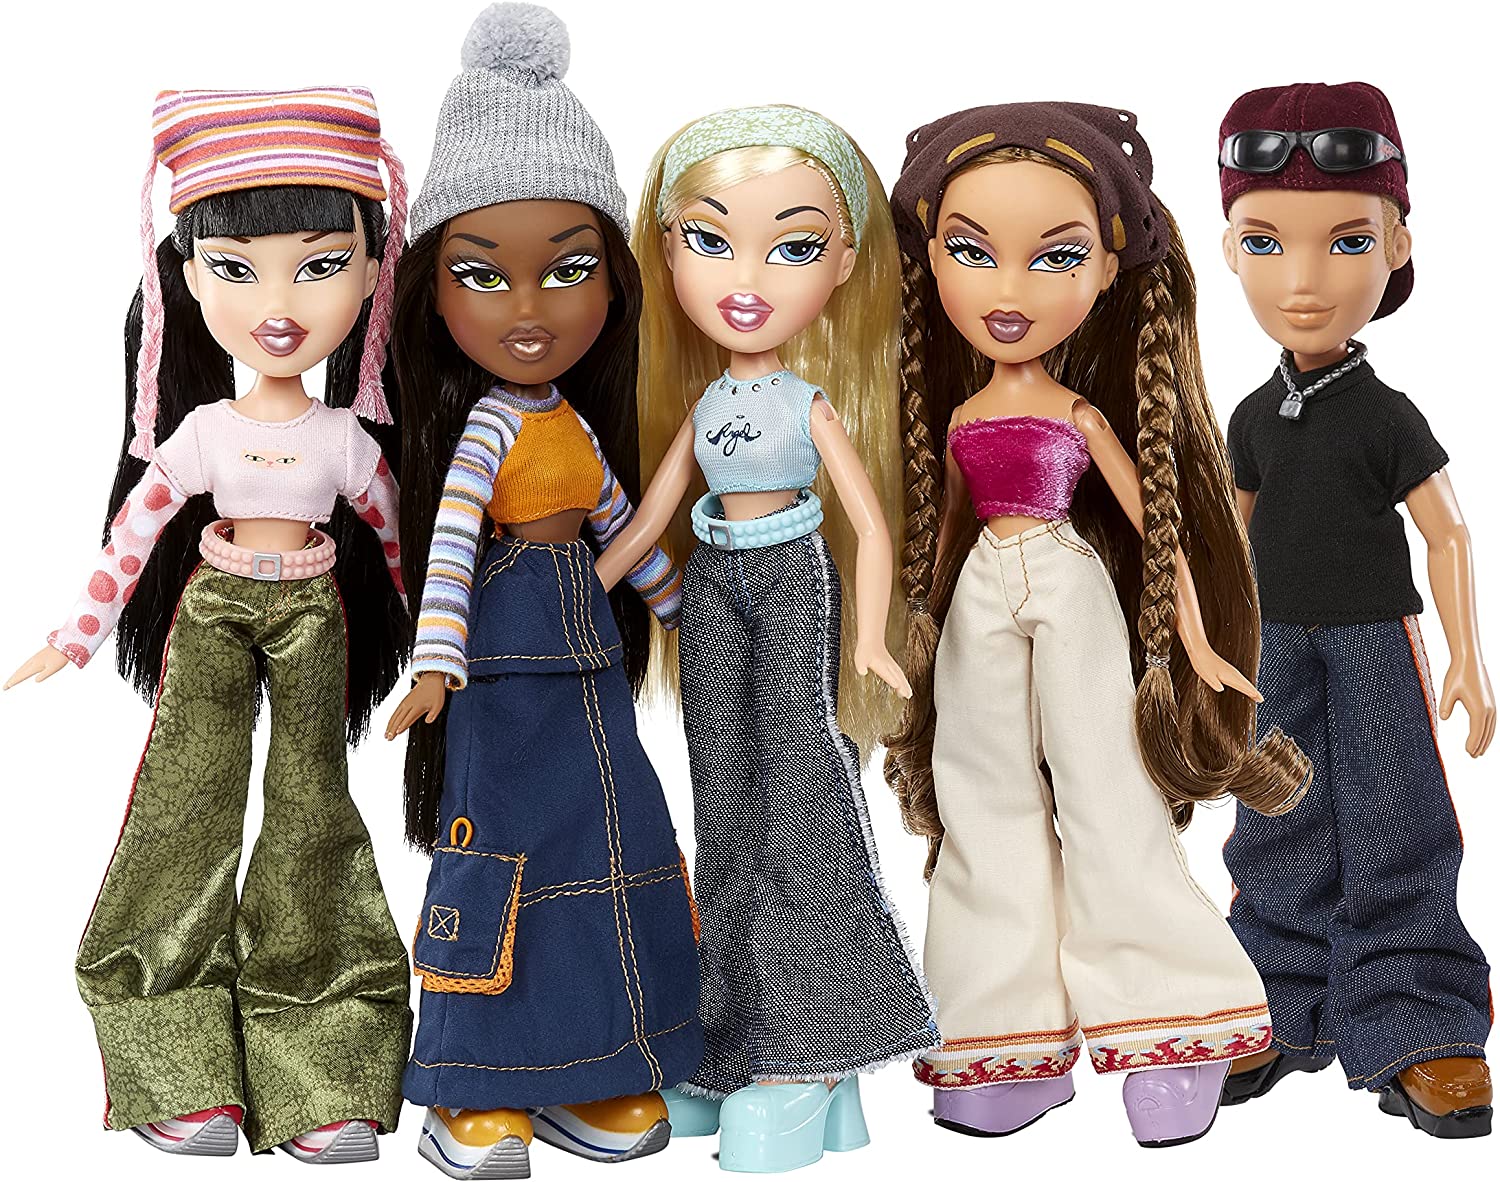 American Girl Dolls Movie in Works From Mattel, 'Pet Sematary' Writer